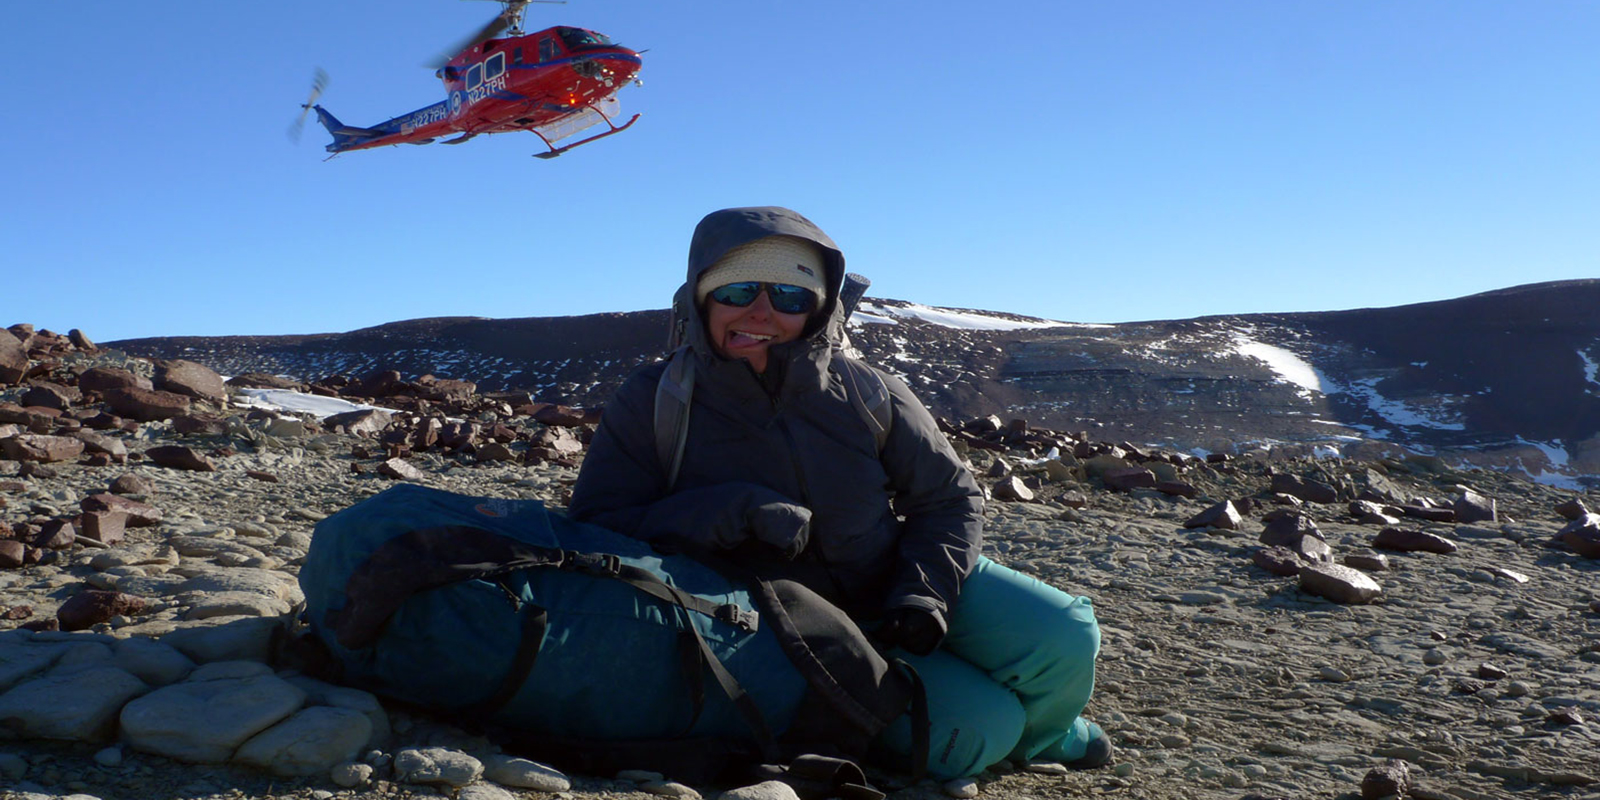 a woman bundled in cold-weather gear smiles at the camera as a helicopter lands behind her